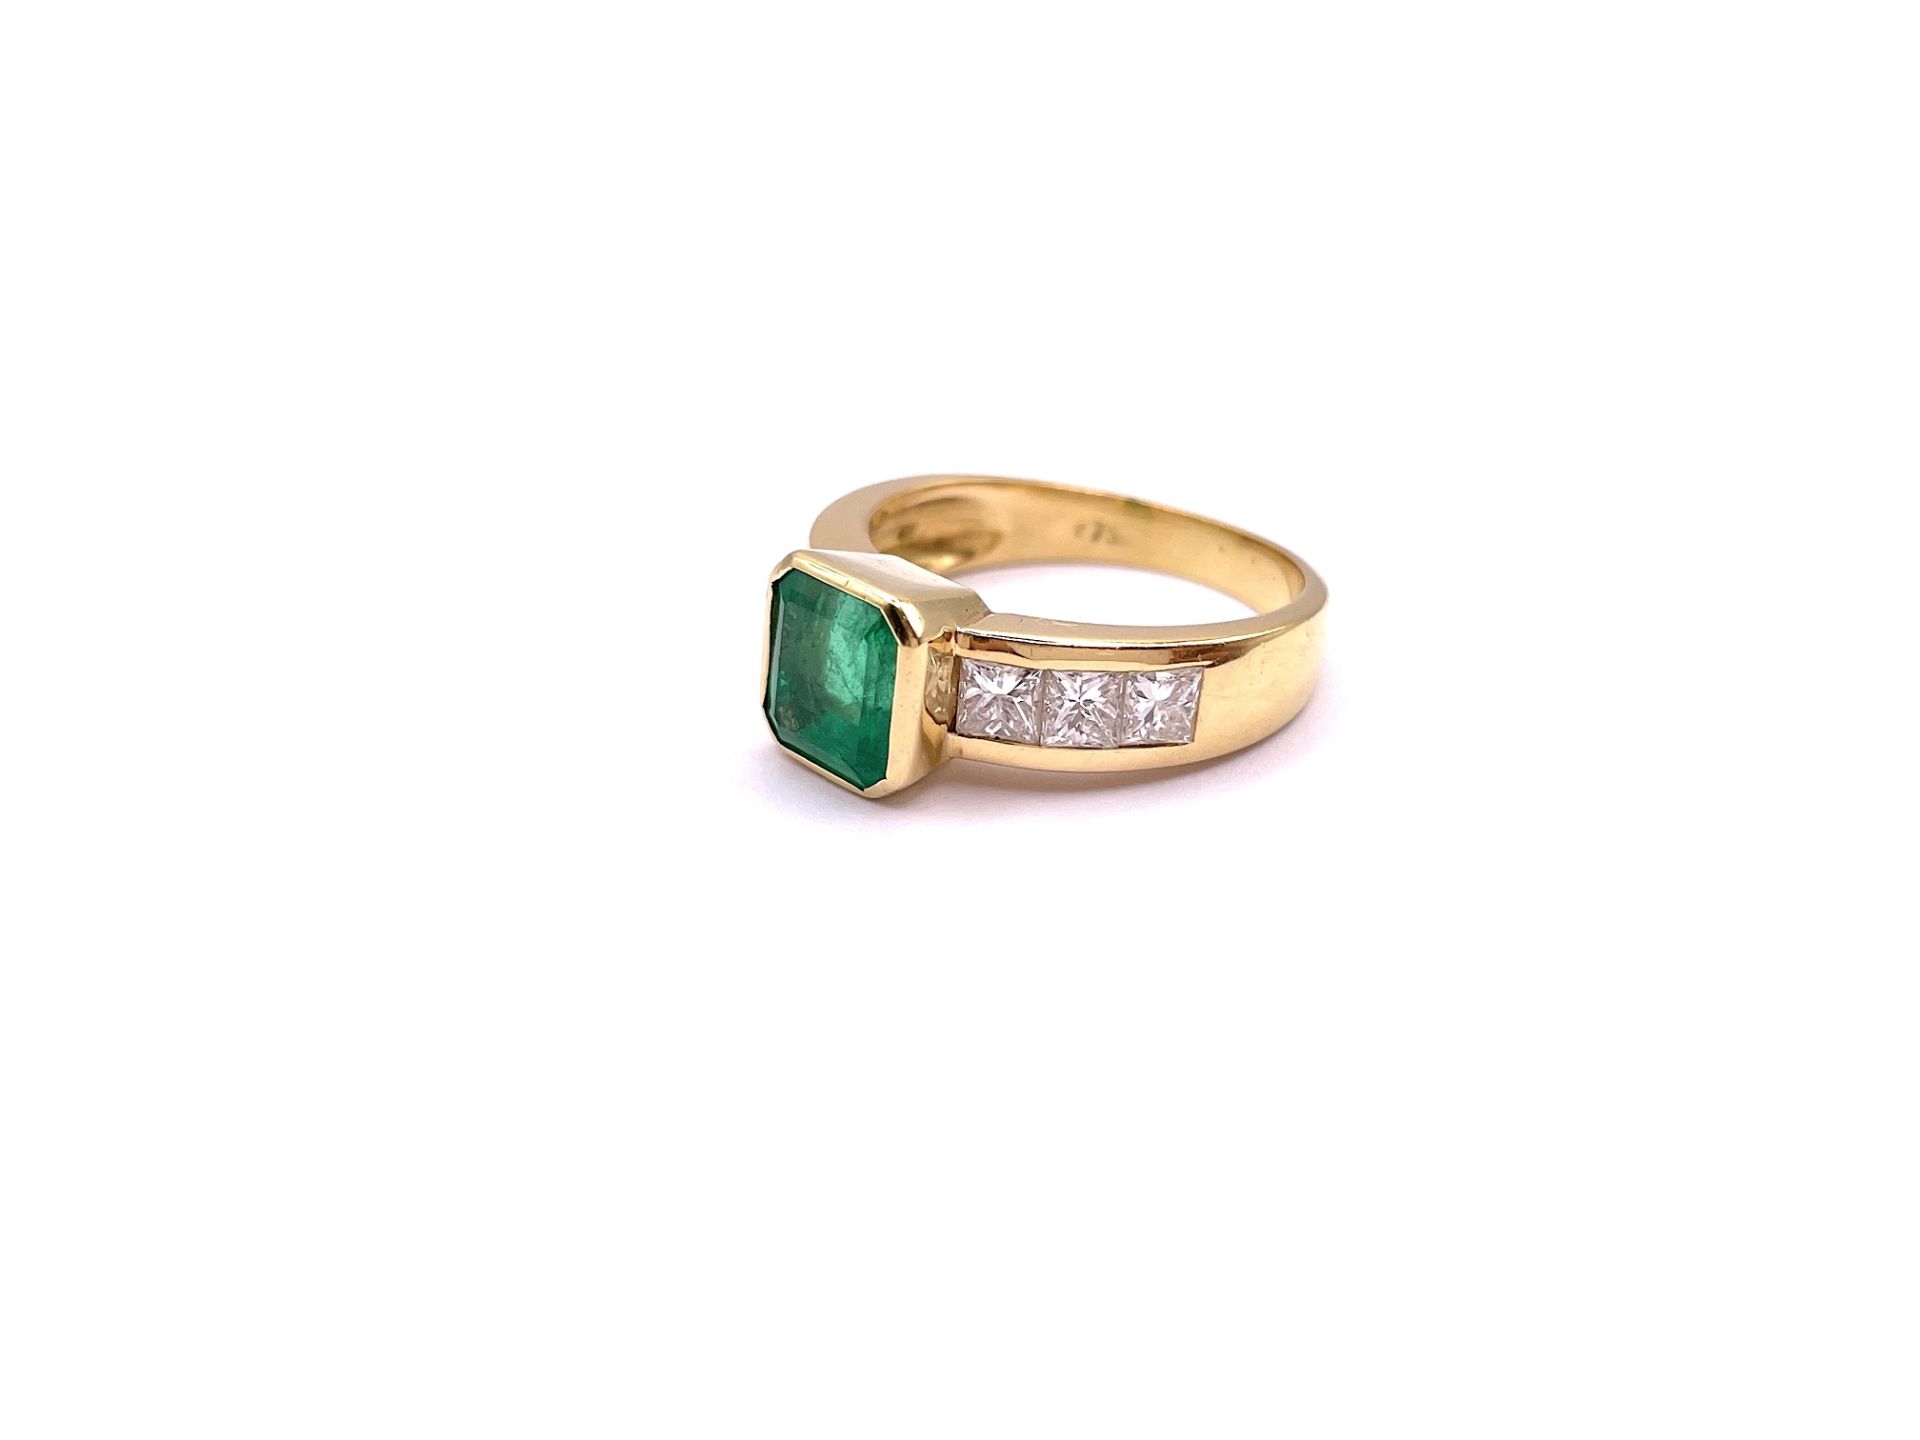 Emerald ring - Image 4 of 5